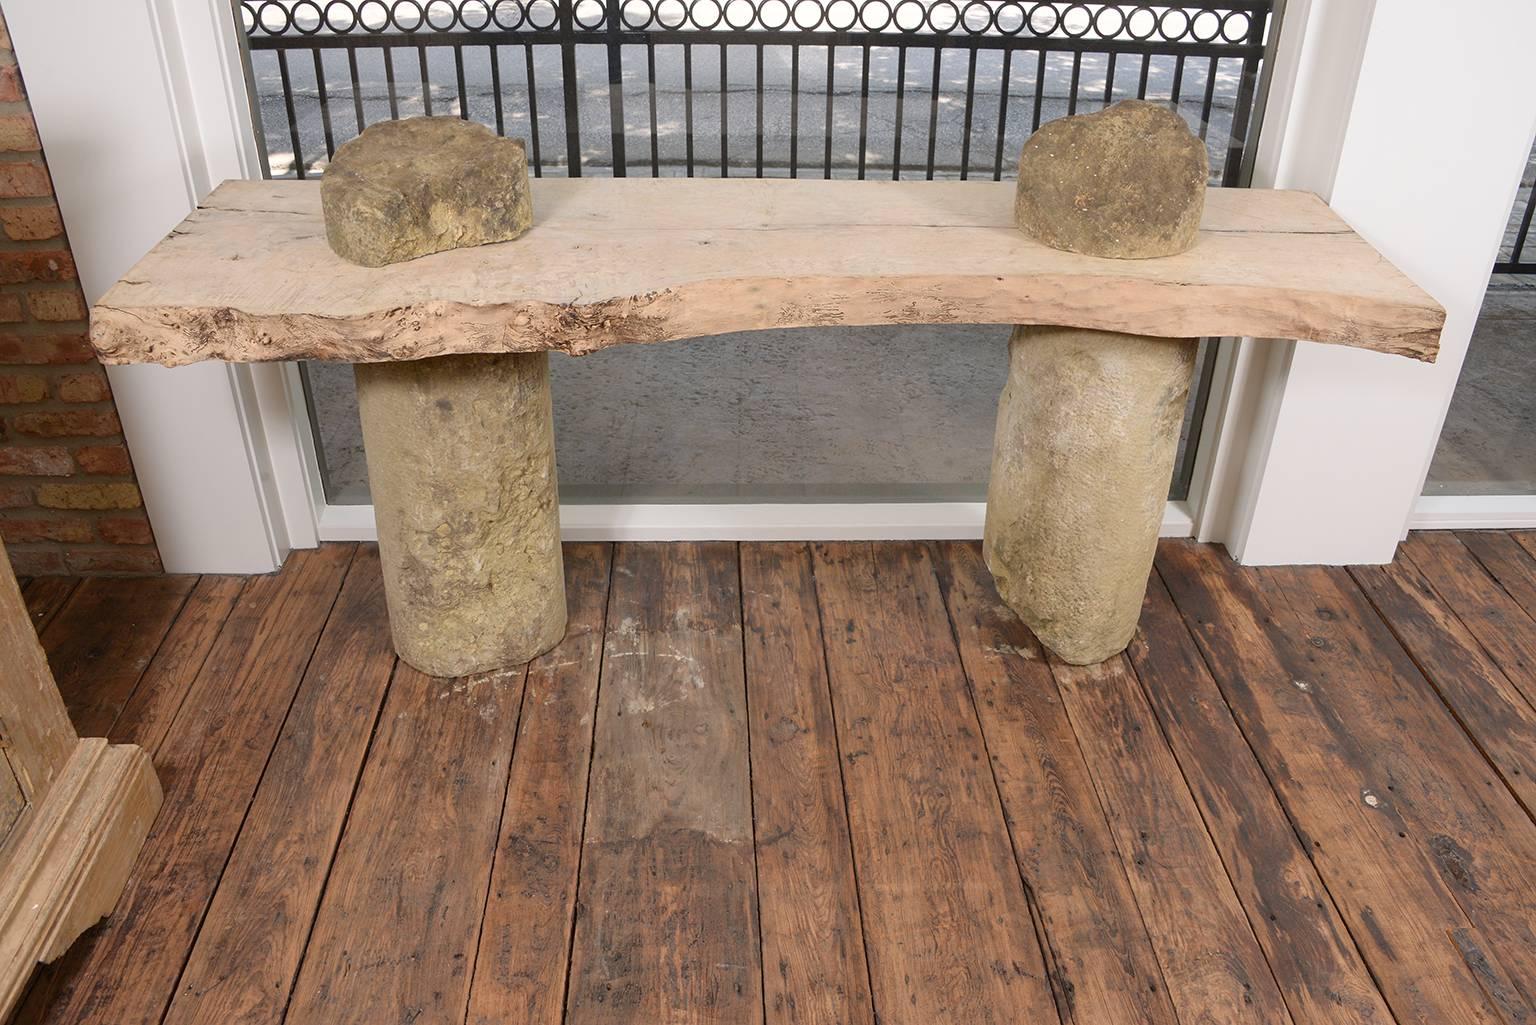 Very interesting stone and wood Italian console from the 19th century. The live edge wood is a beautiful bleached color. The stone is from Venice and was part of the canals. The top stones can stay in place or be removed.